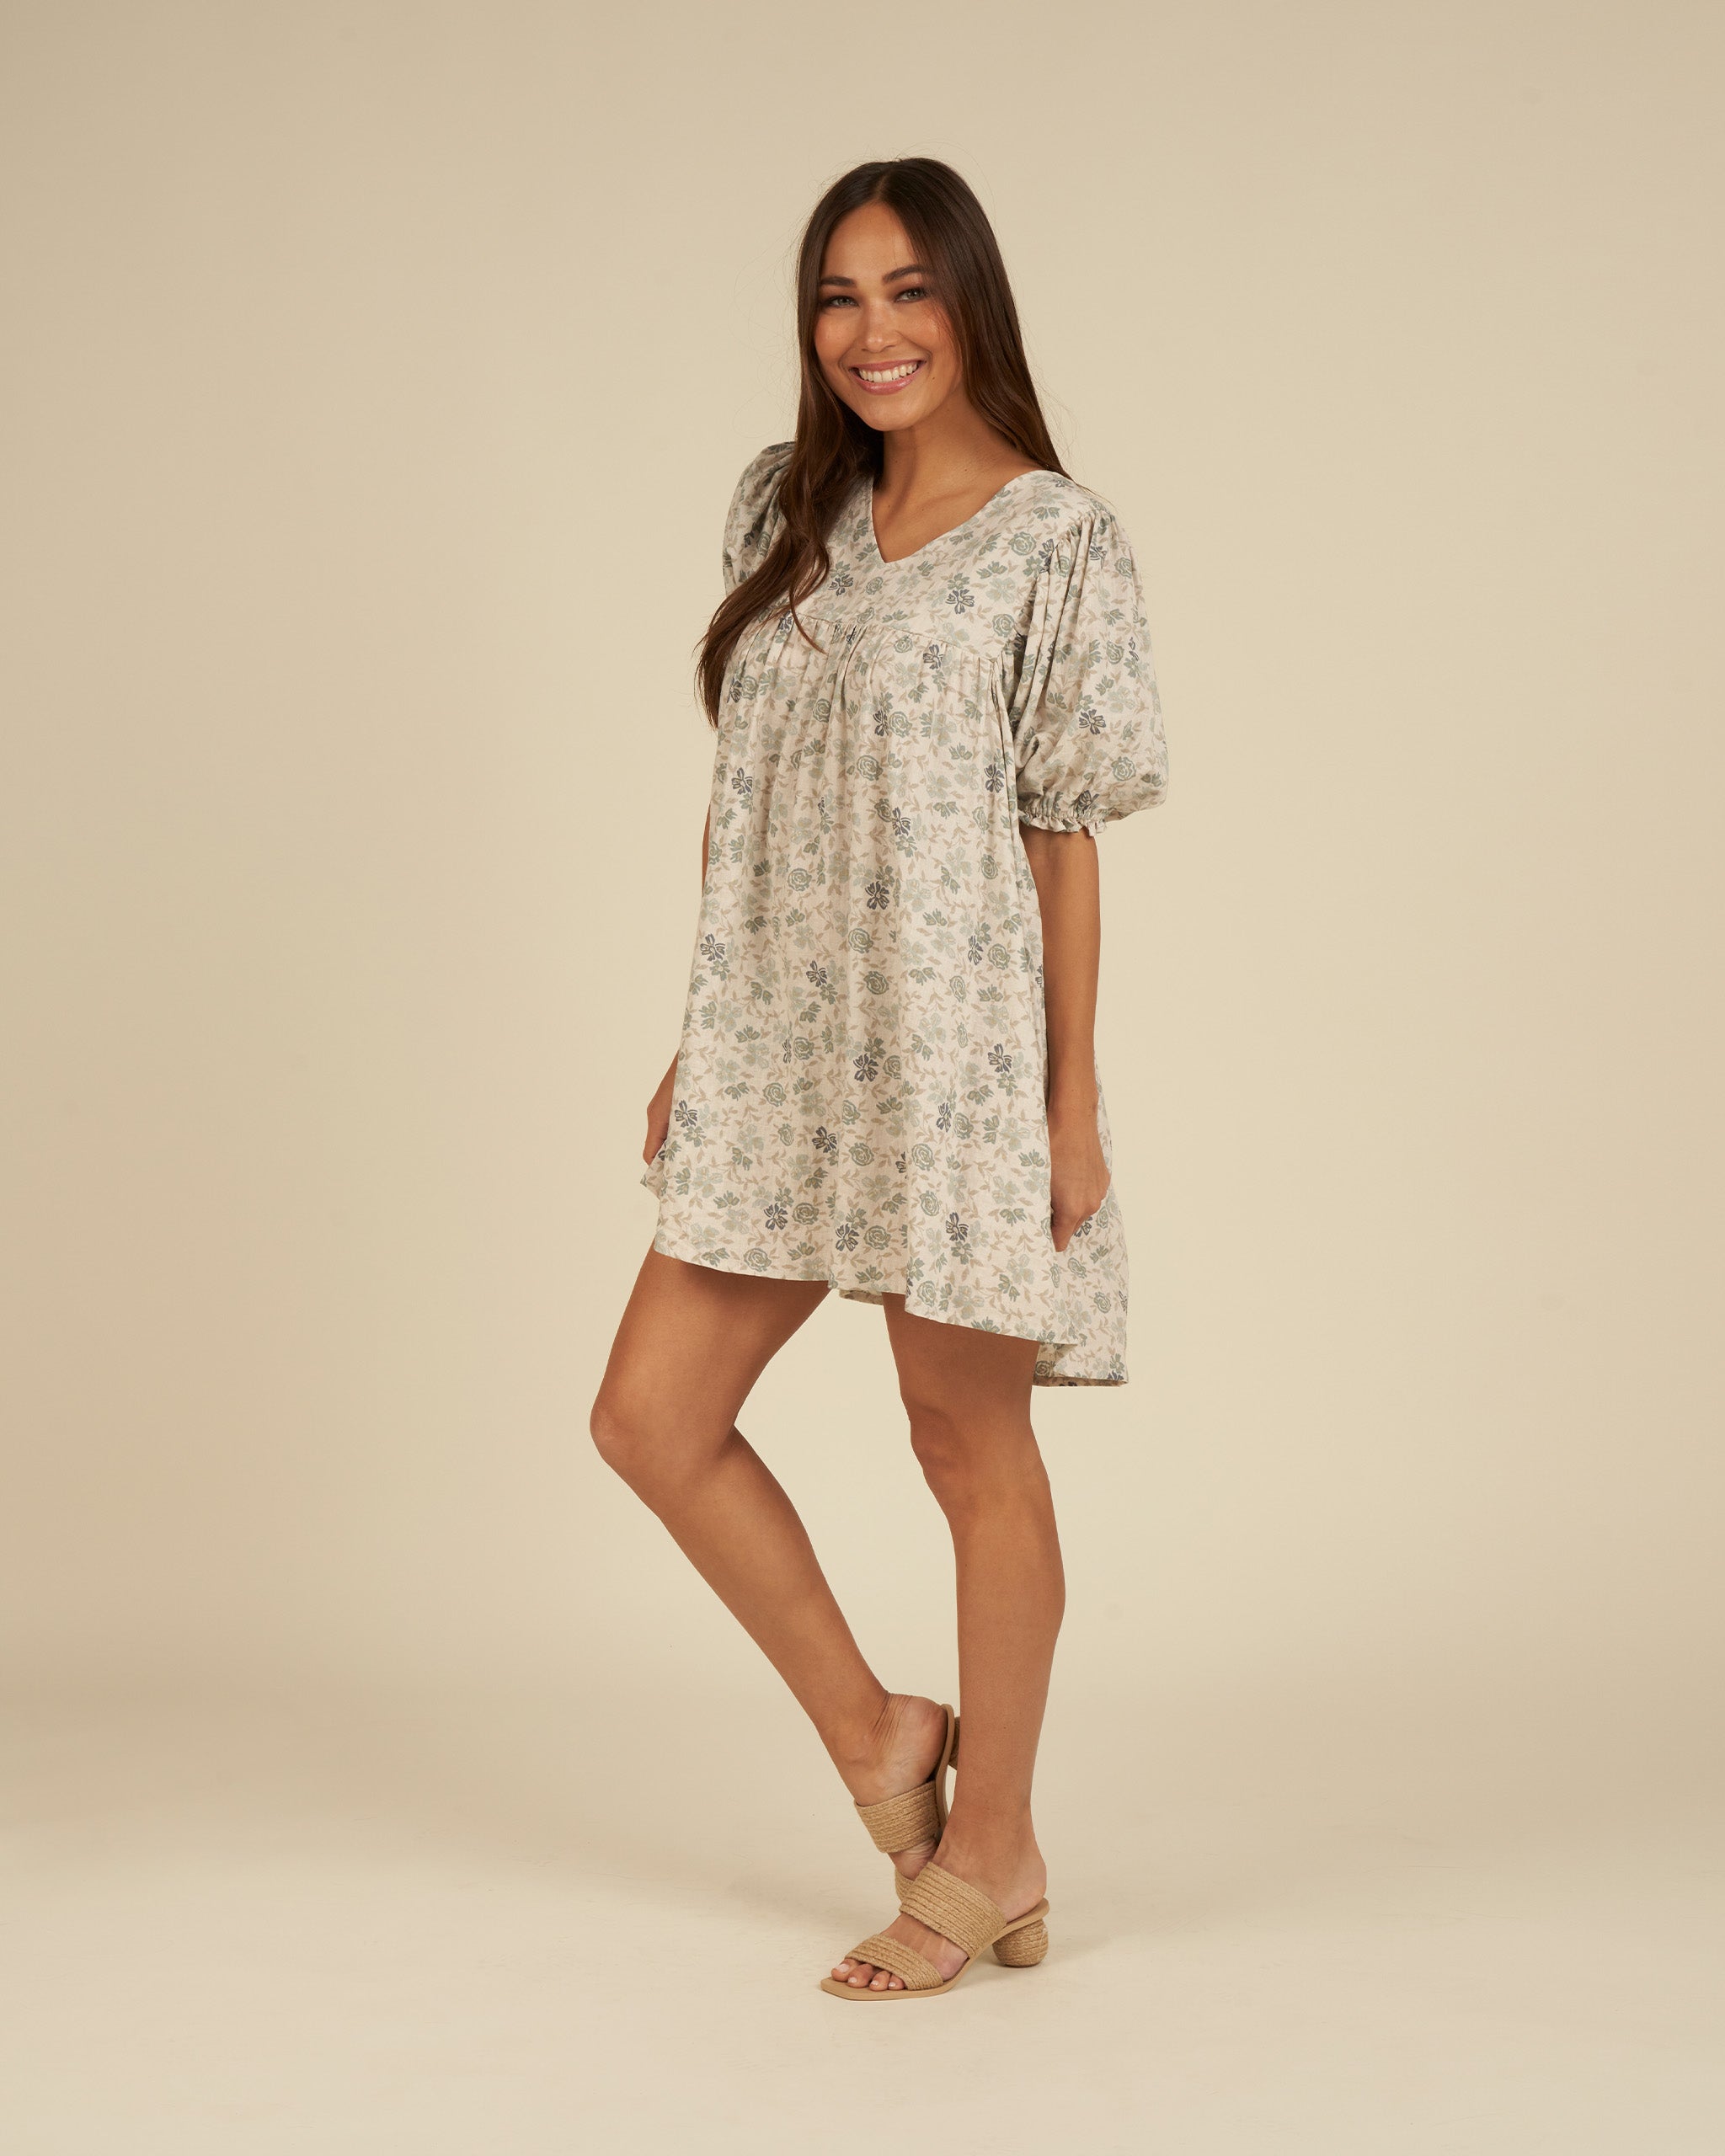 Rylee + Cru Crochet Romper in Floral – Cottontail & Co.